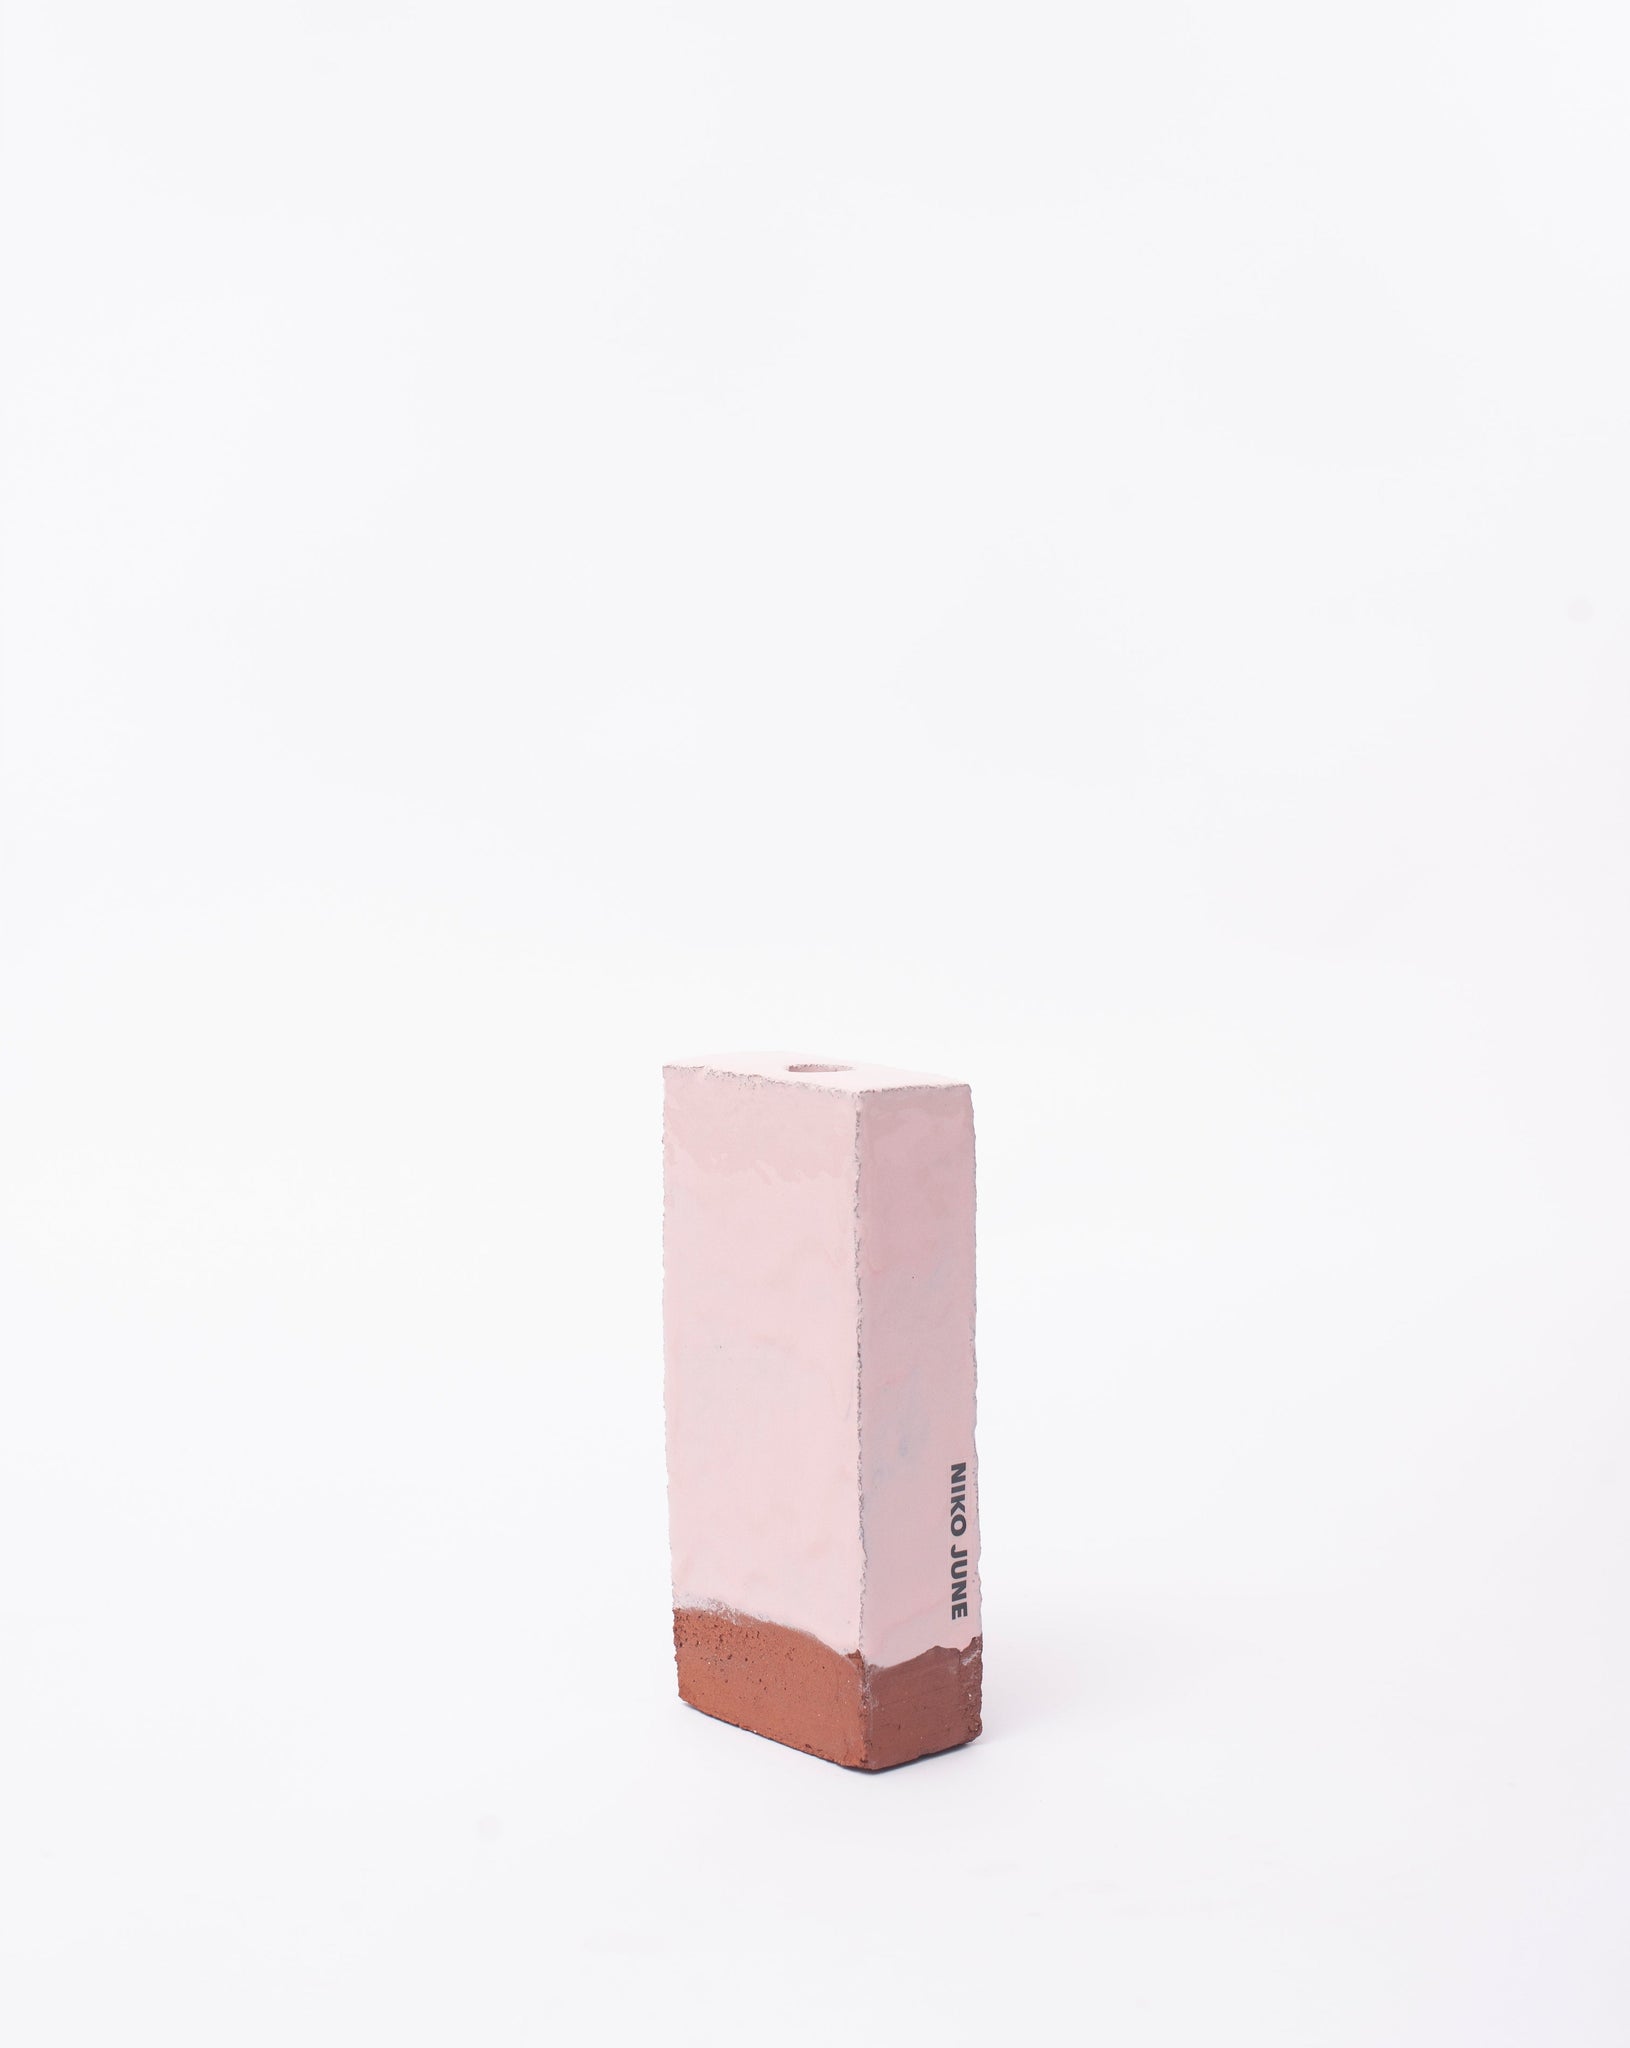 Handmade pink brick ceramic candle holder in white glaze in white background with right side view